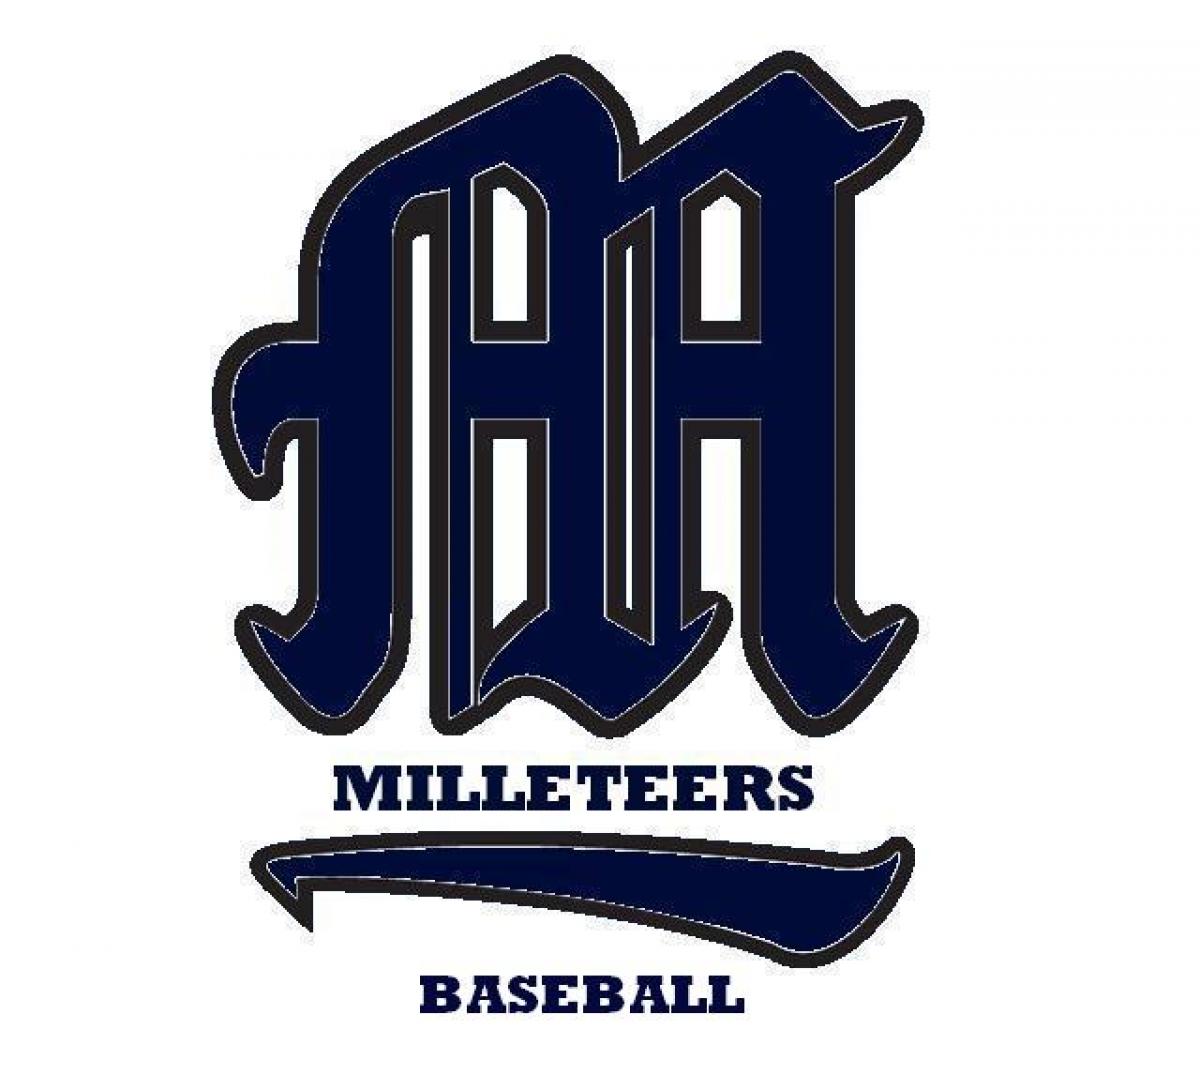 Milleteers Dent Bardo’s Playoff Hopes